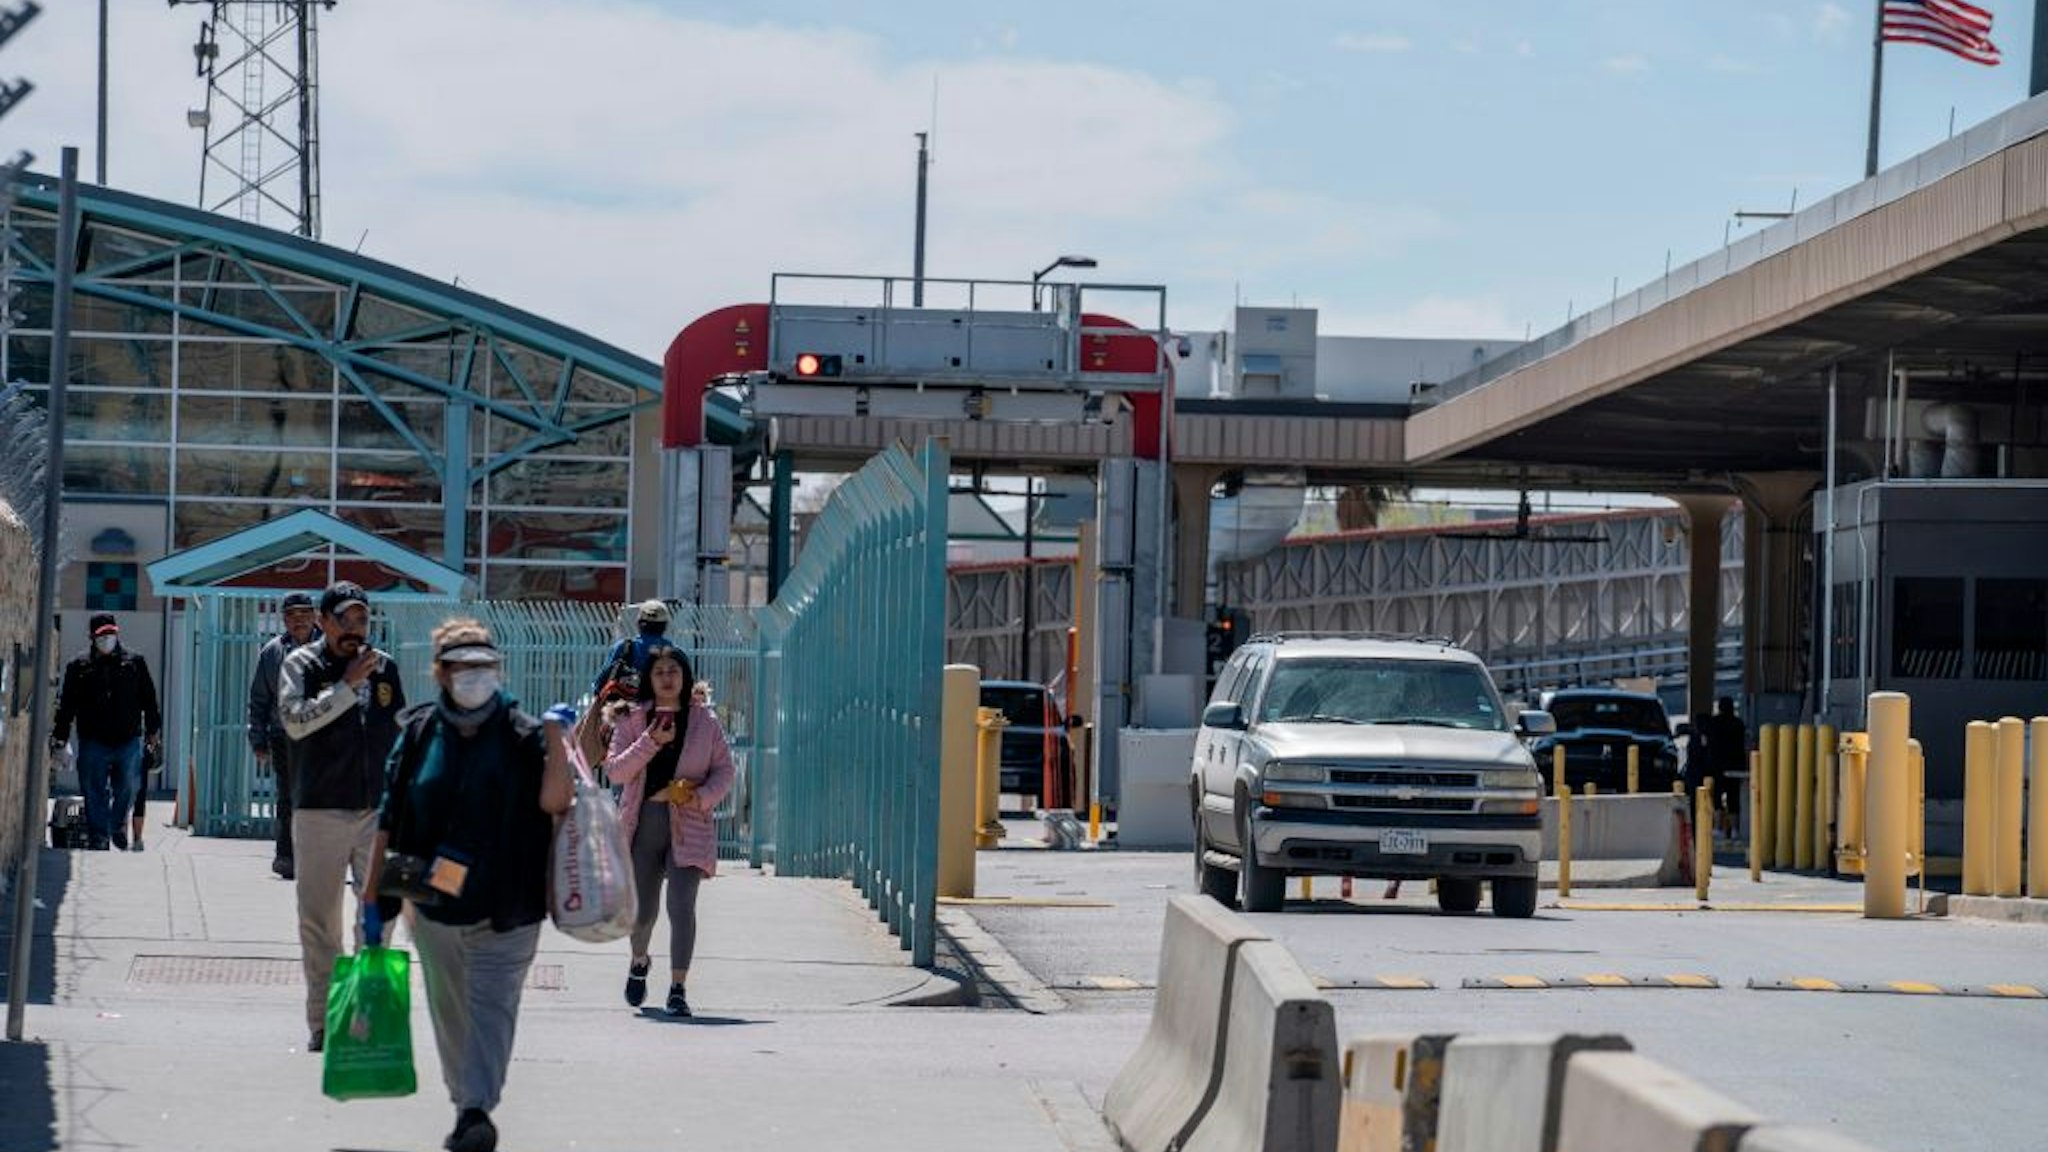 Residents exit US Customs and Border Protection at the Paso del Norte International Bridge during a shut-down of non-essential travel to control the corona virus, COVID-19, outbreak in El Paso, Texas on March 21, 2020.